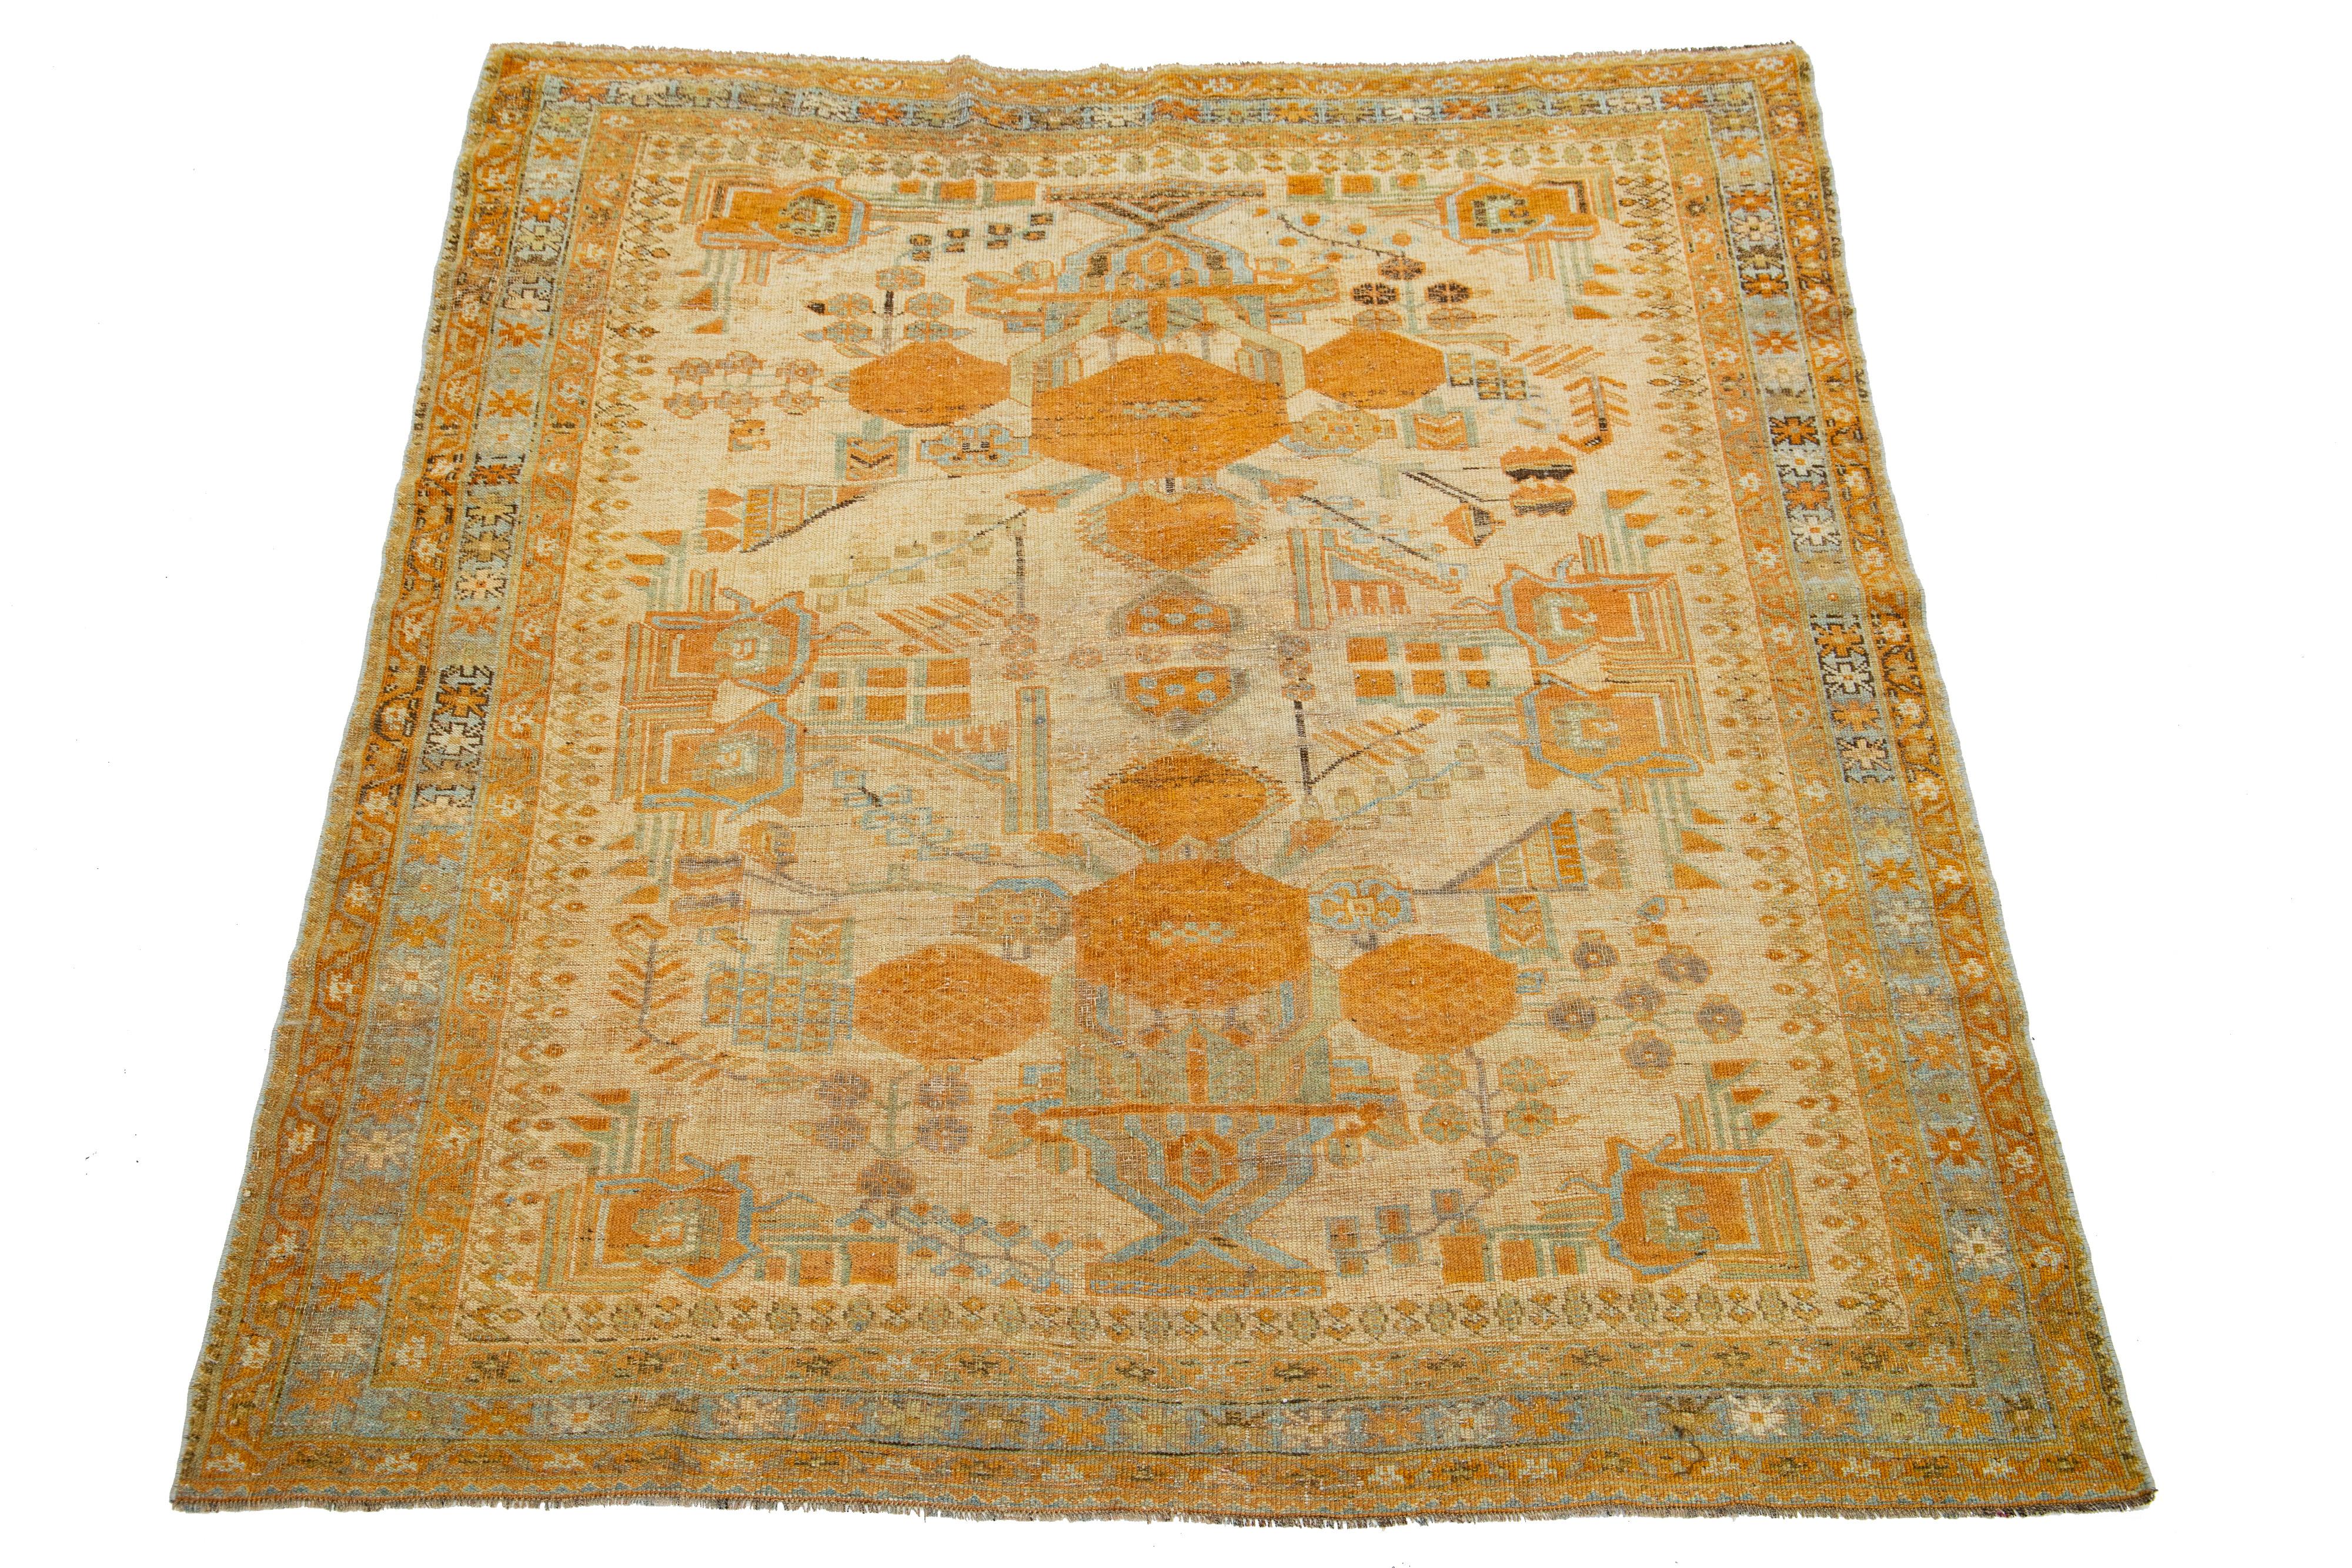 Beautiful antique Persian hand-knotted wool rug with a tan color field. This piece has a blue-designed frame with orange accents in a gorgeous all-over pattern.

This rug measures 5' x 6'1